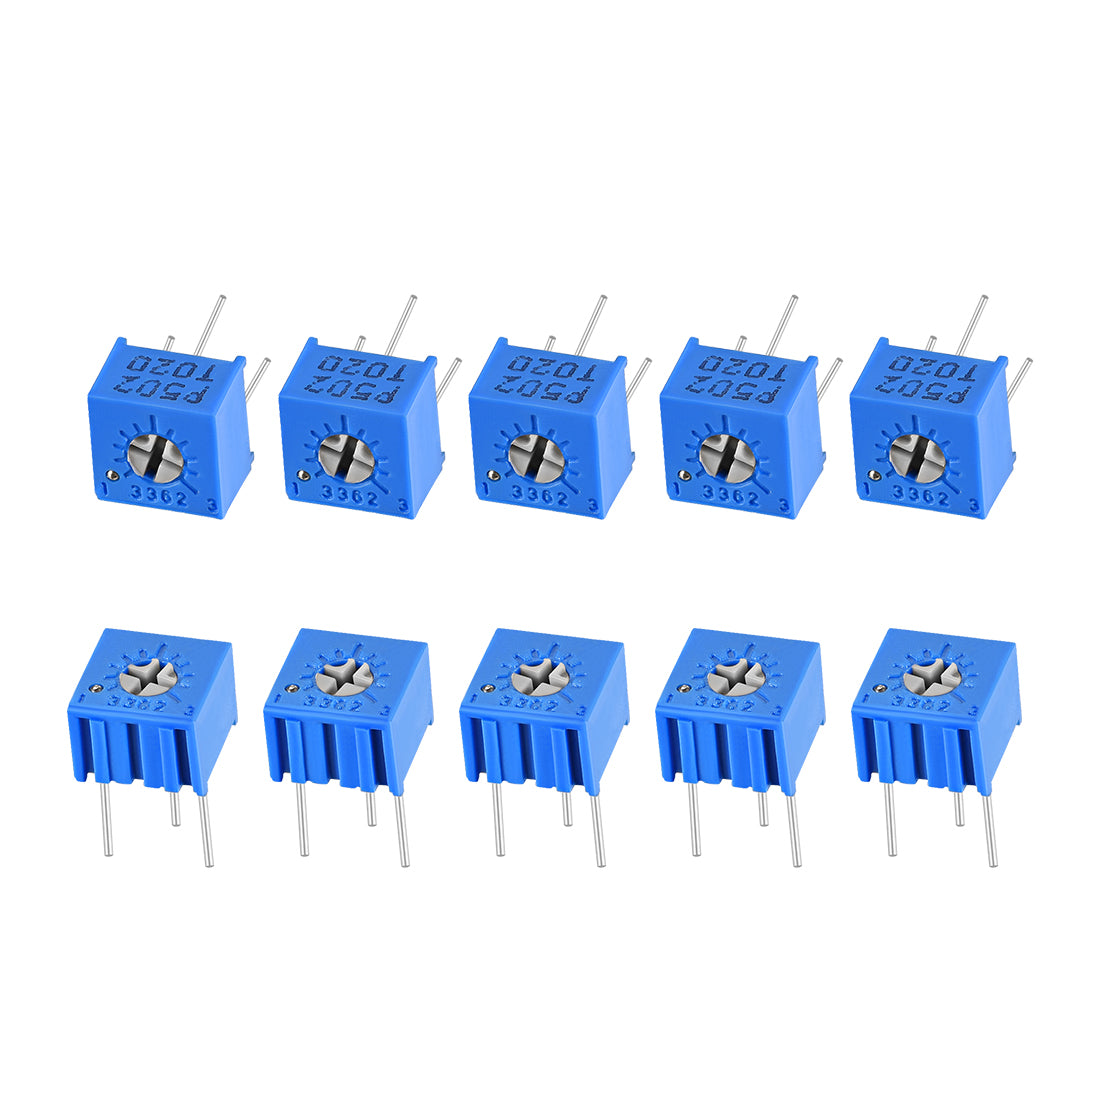 uxcell Uxcell 3362 Trimmer Potentiometer 5K Ohm Top Adjustment Horizontal Variable Resistors 10Pcs